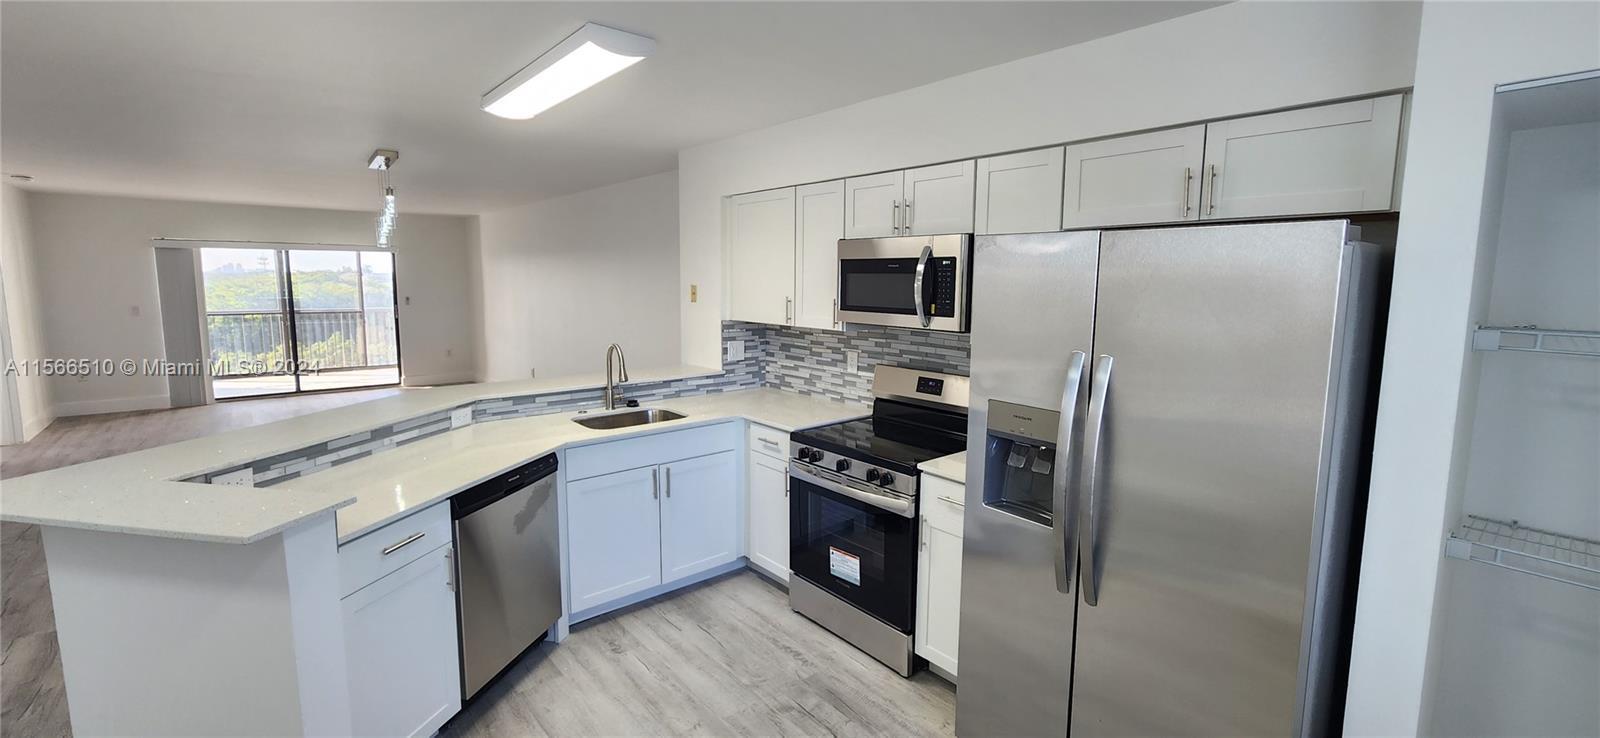 A MUST SEE! Immaculate fully remodeled 2/2 Condo in Pompano Beach. Beautiful cabinets, Quartz counte